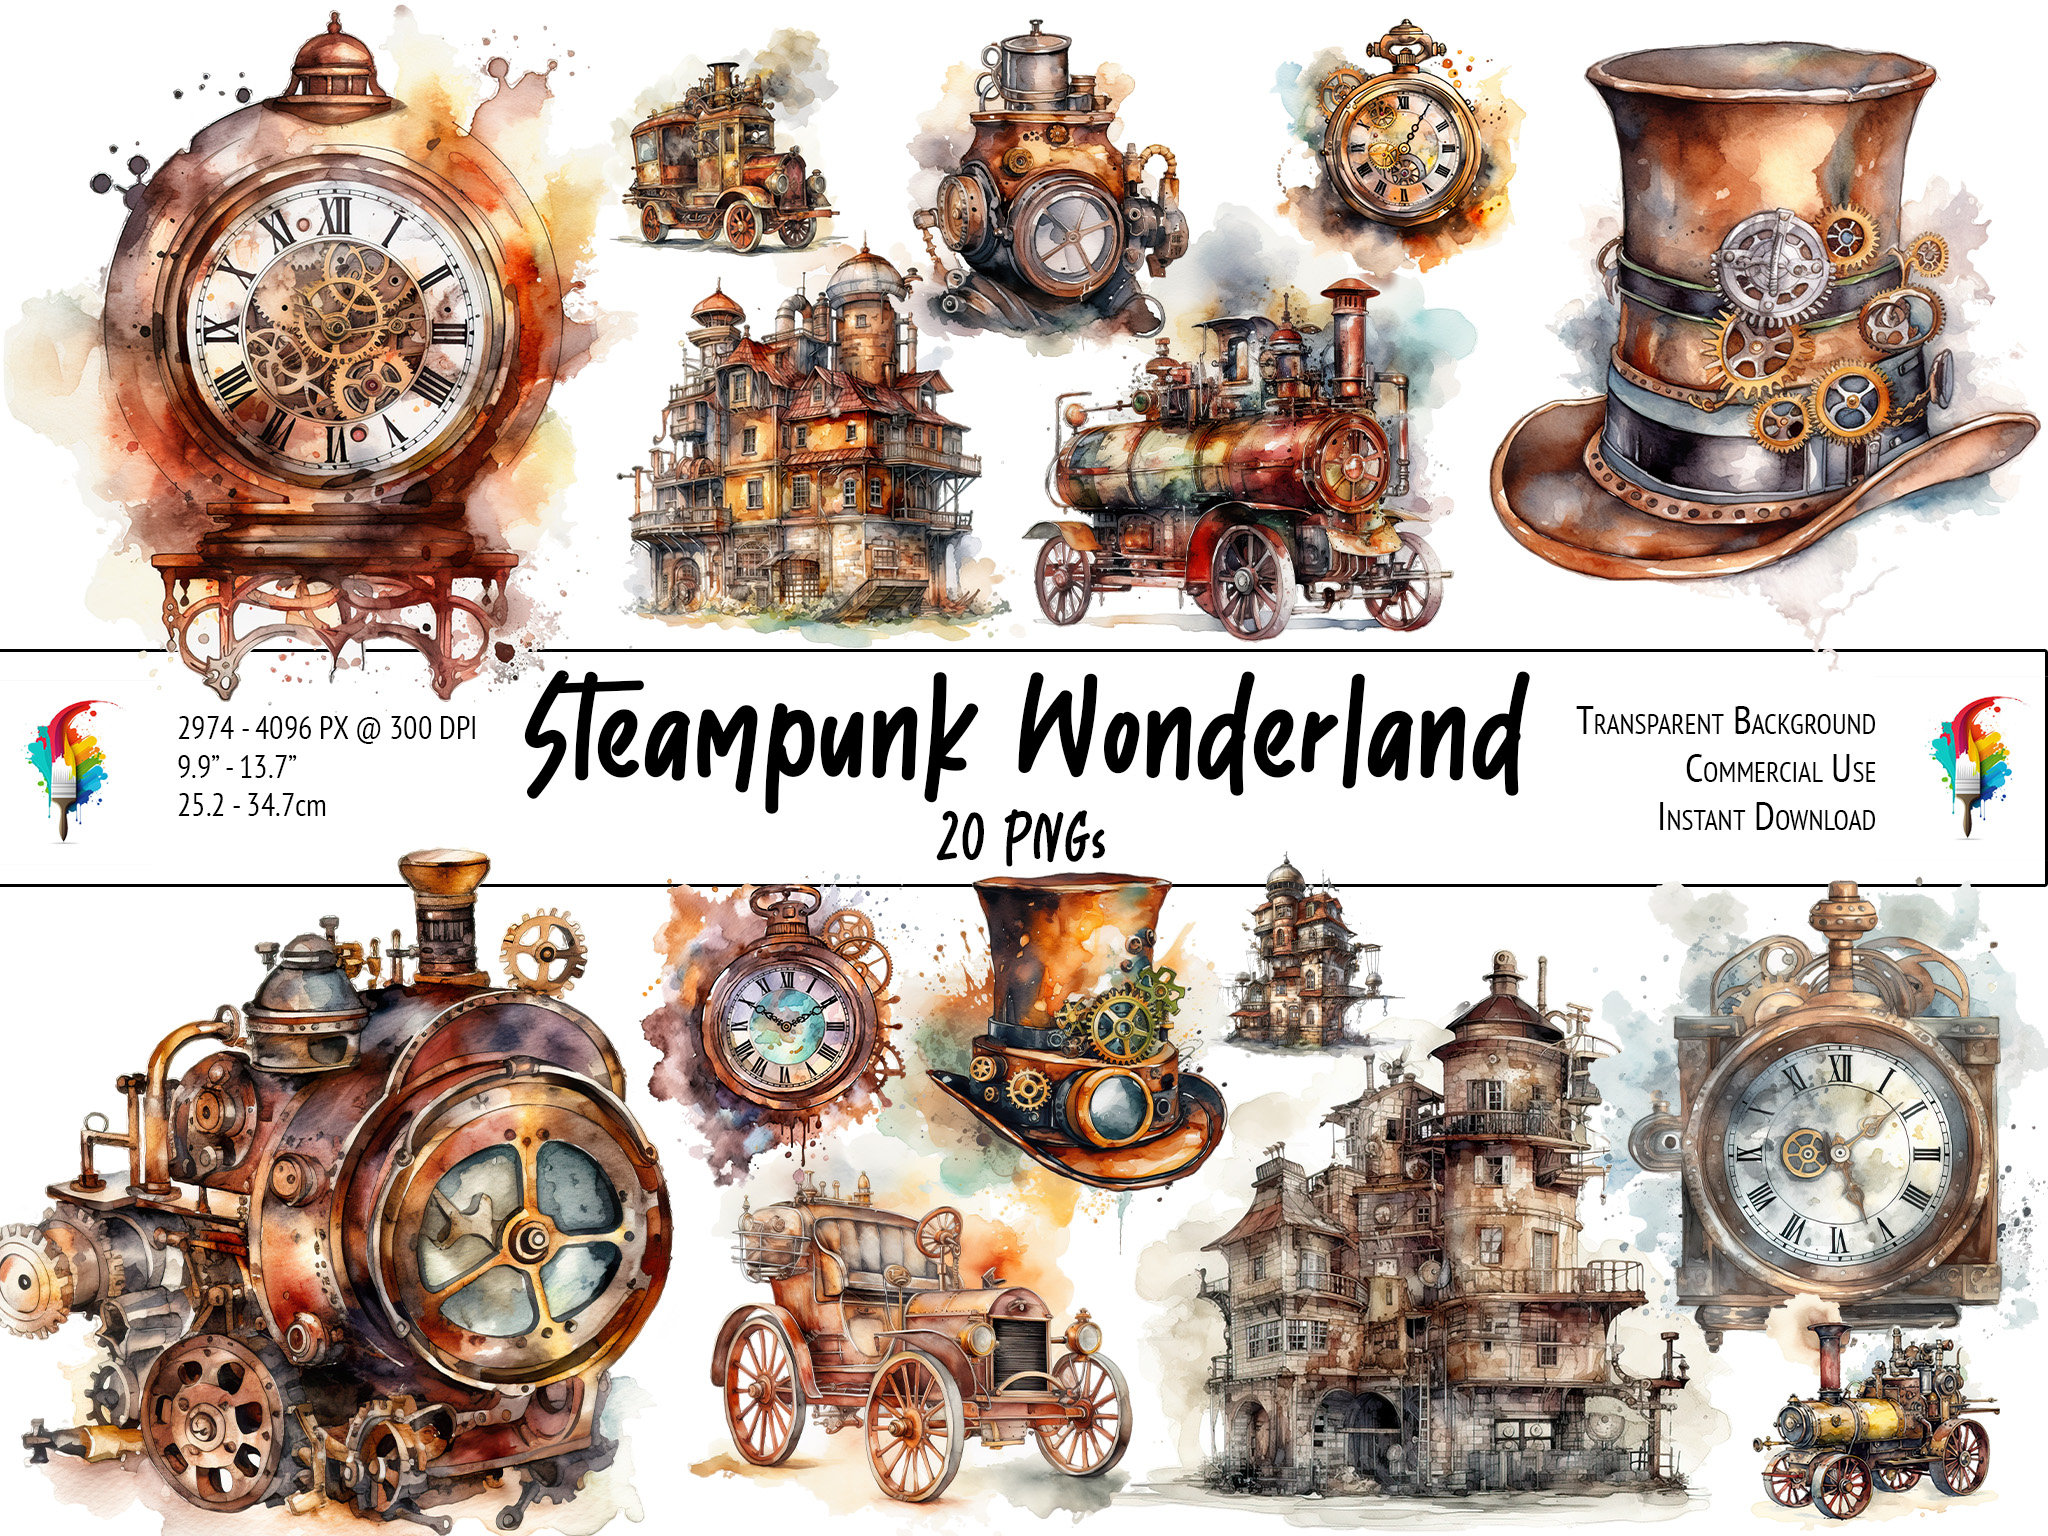 Steampunk Clock SVG for Printing and Cutting Projects, Steampunk